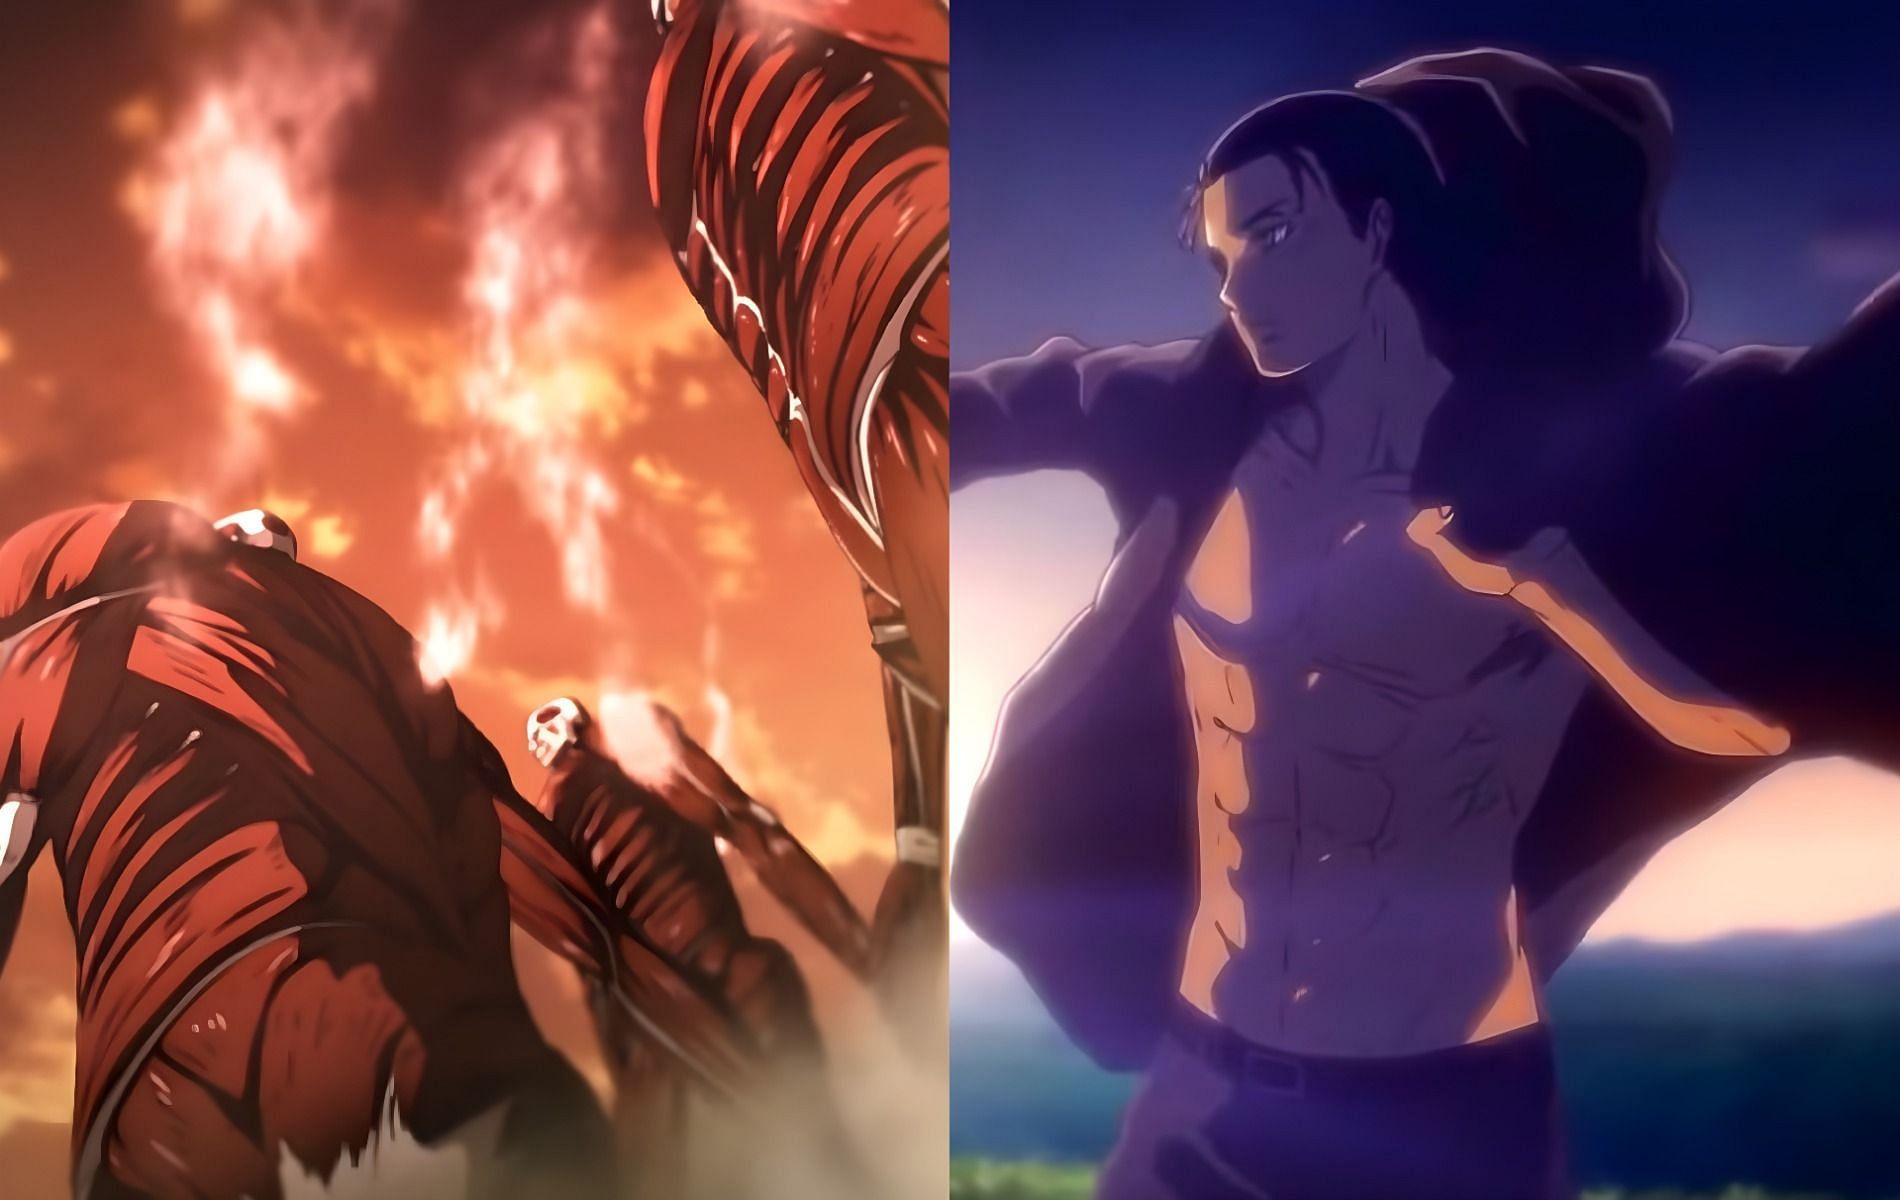 Eren Yeager in Attack on Titan: A Tragic Hero or an Agent of Chaos? (Image via Attack on Titan)